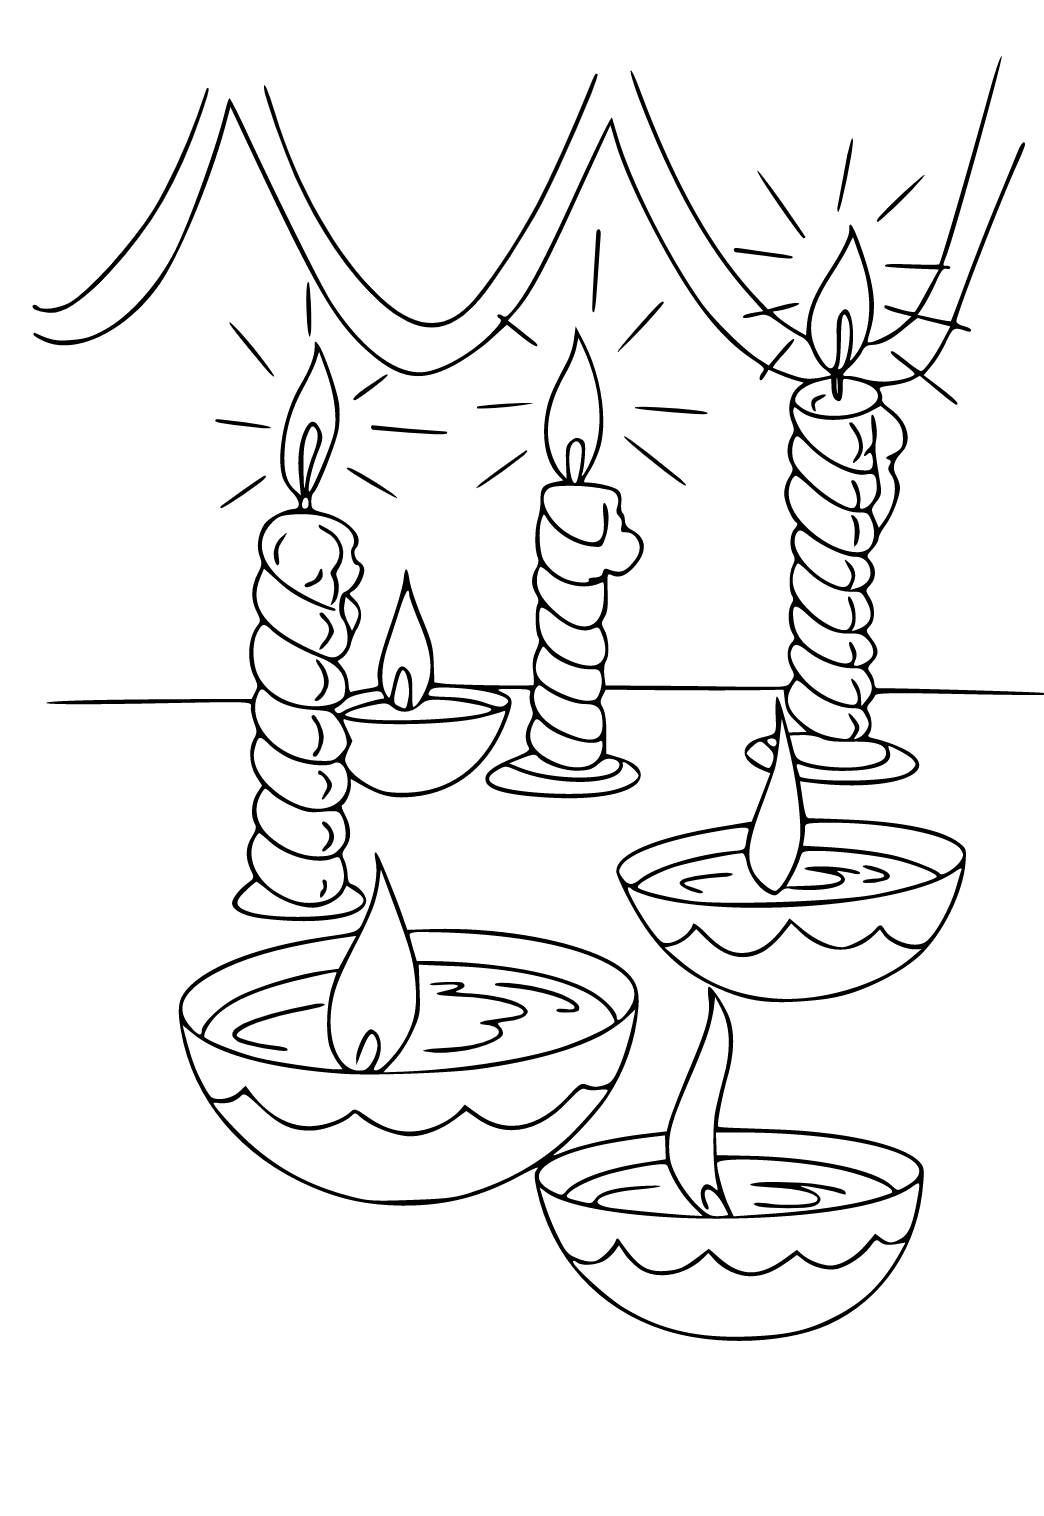 winnie the pooh coloring pages birthday candles